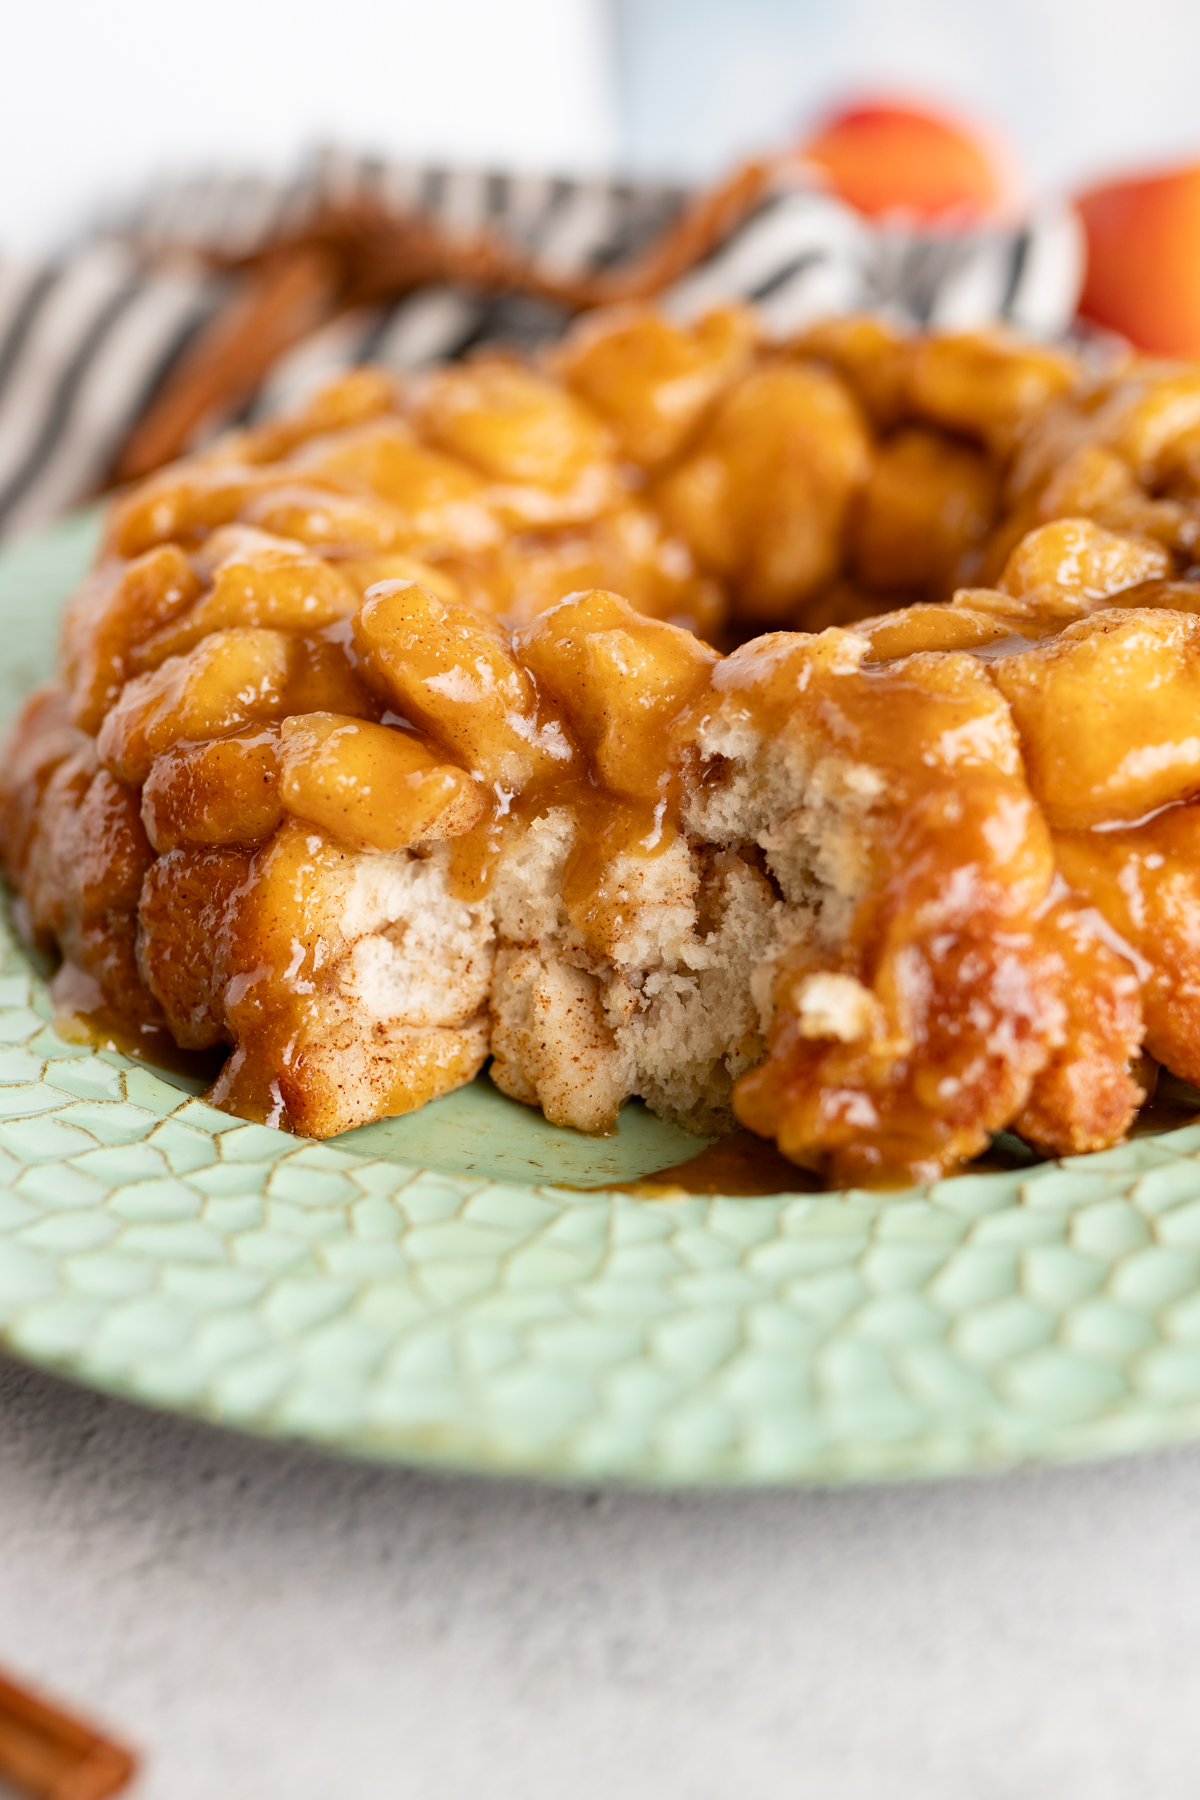 monkey bread with a portion of the bread removed, showing the buttery and cinnamony inside of the bread. 